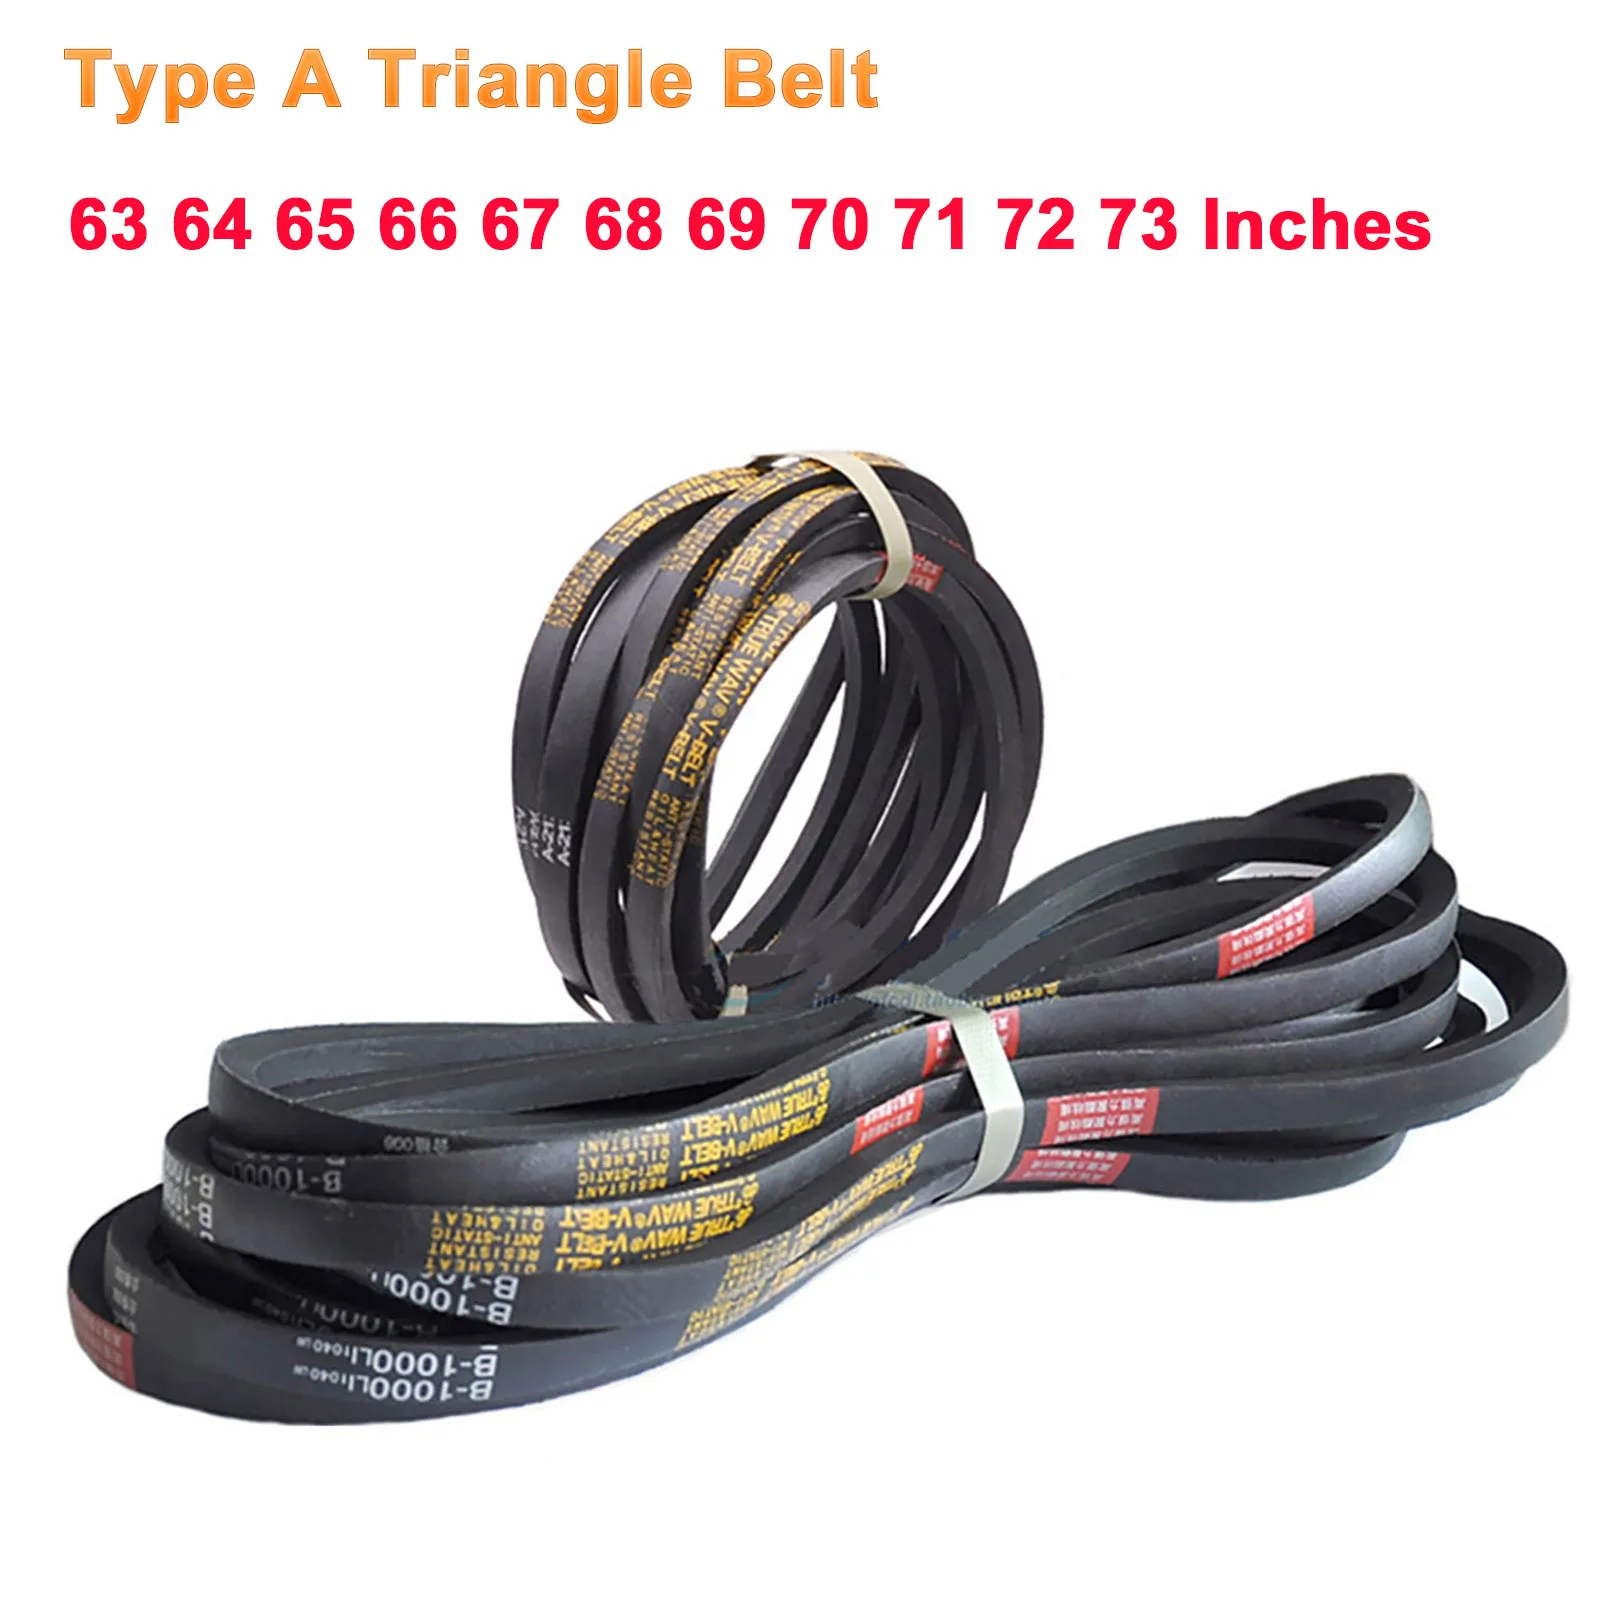 

1PCS Type A Rubber Triangle Belt A63 64 65 66 67 68 69 70 71 72 73 Inch High Wear-Resistant Automobile Equipment Agricultural